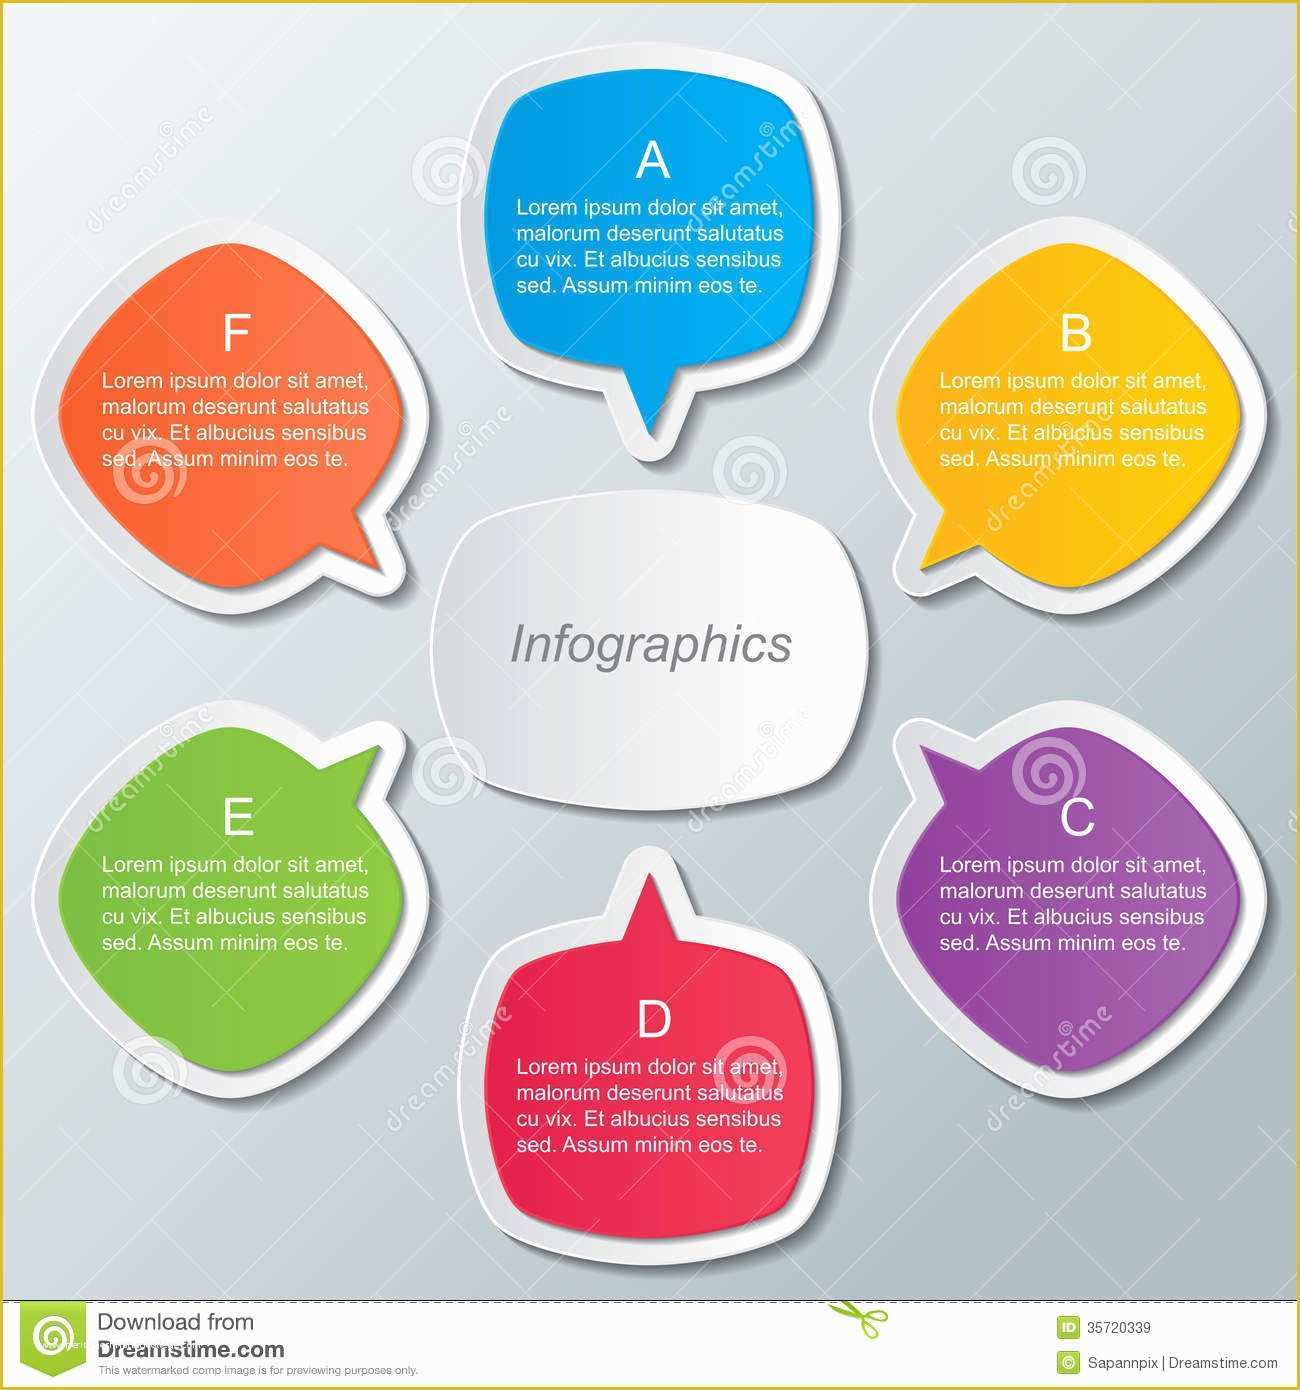 free-infographic-templates-for-word-of-19-infographic-template-free